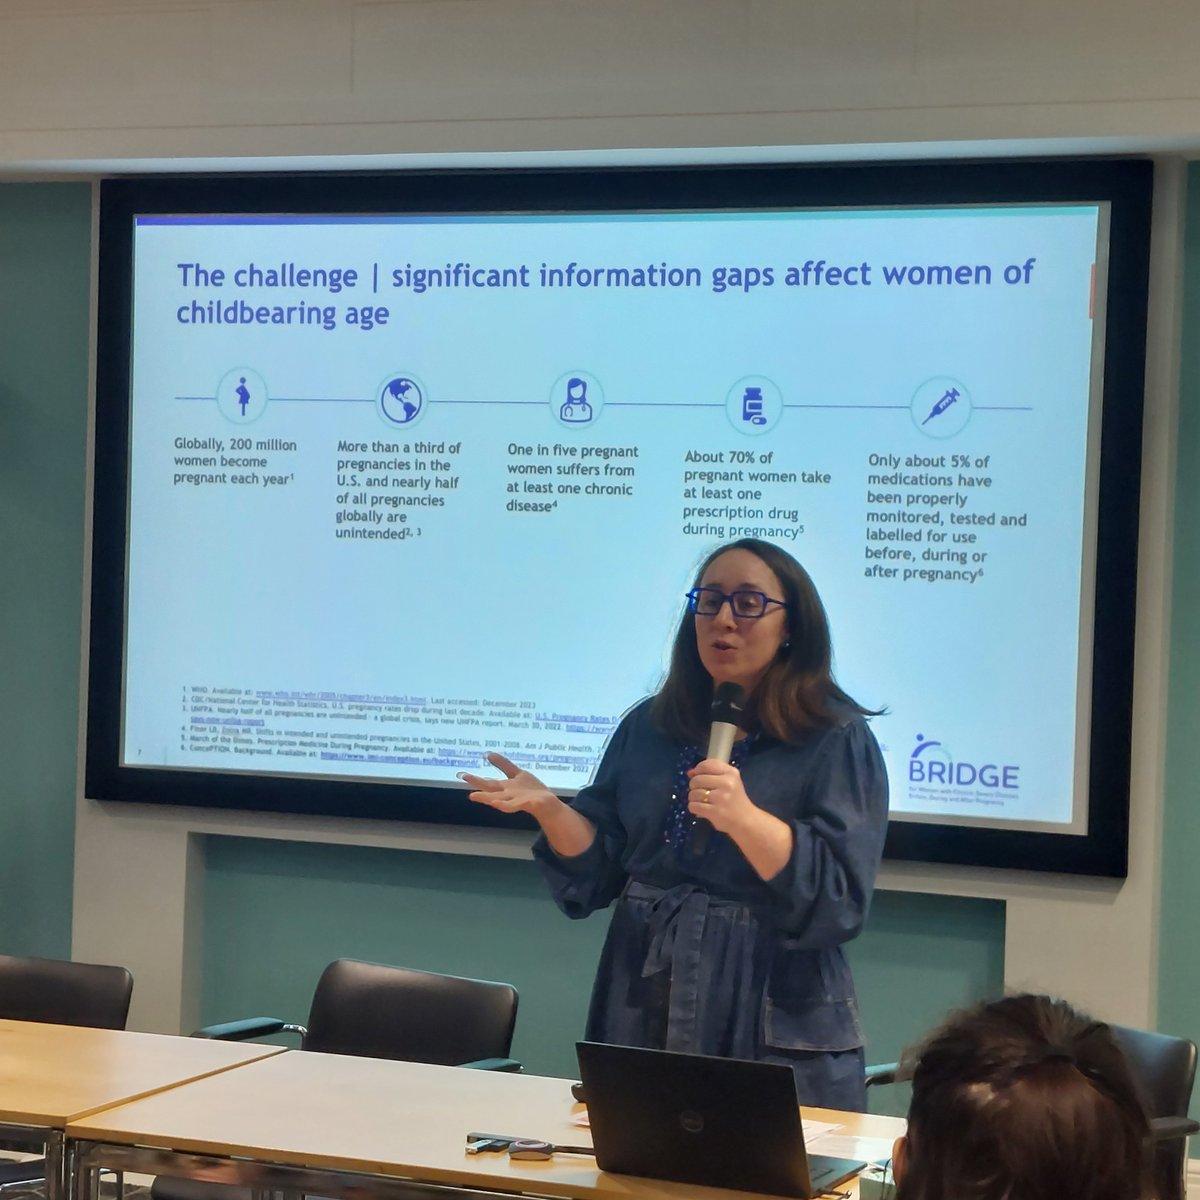 #PatientandPublicInvolvement in #WomensHealthResearch is about making sure research is meaningful and about us: Ngawai Moss@ngawai_n at yesterday’s #HeavyPeriod #WomensVoices research event with @UCL_IfWH @UCL_CpPro @ICTM_UCL